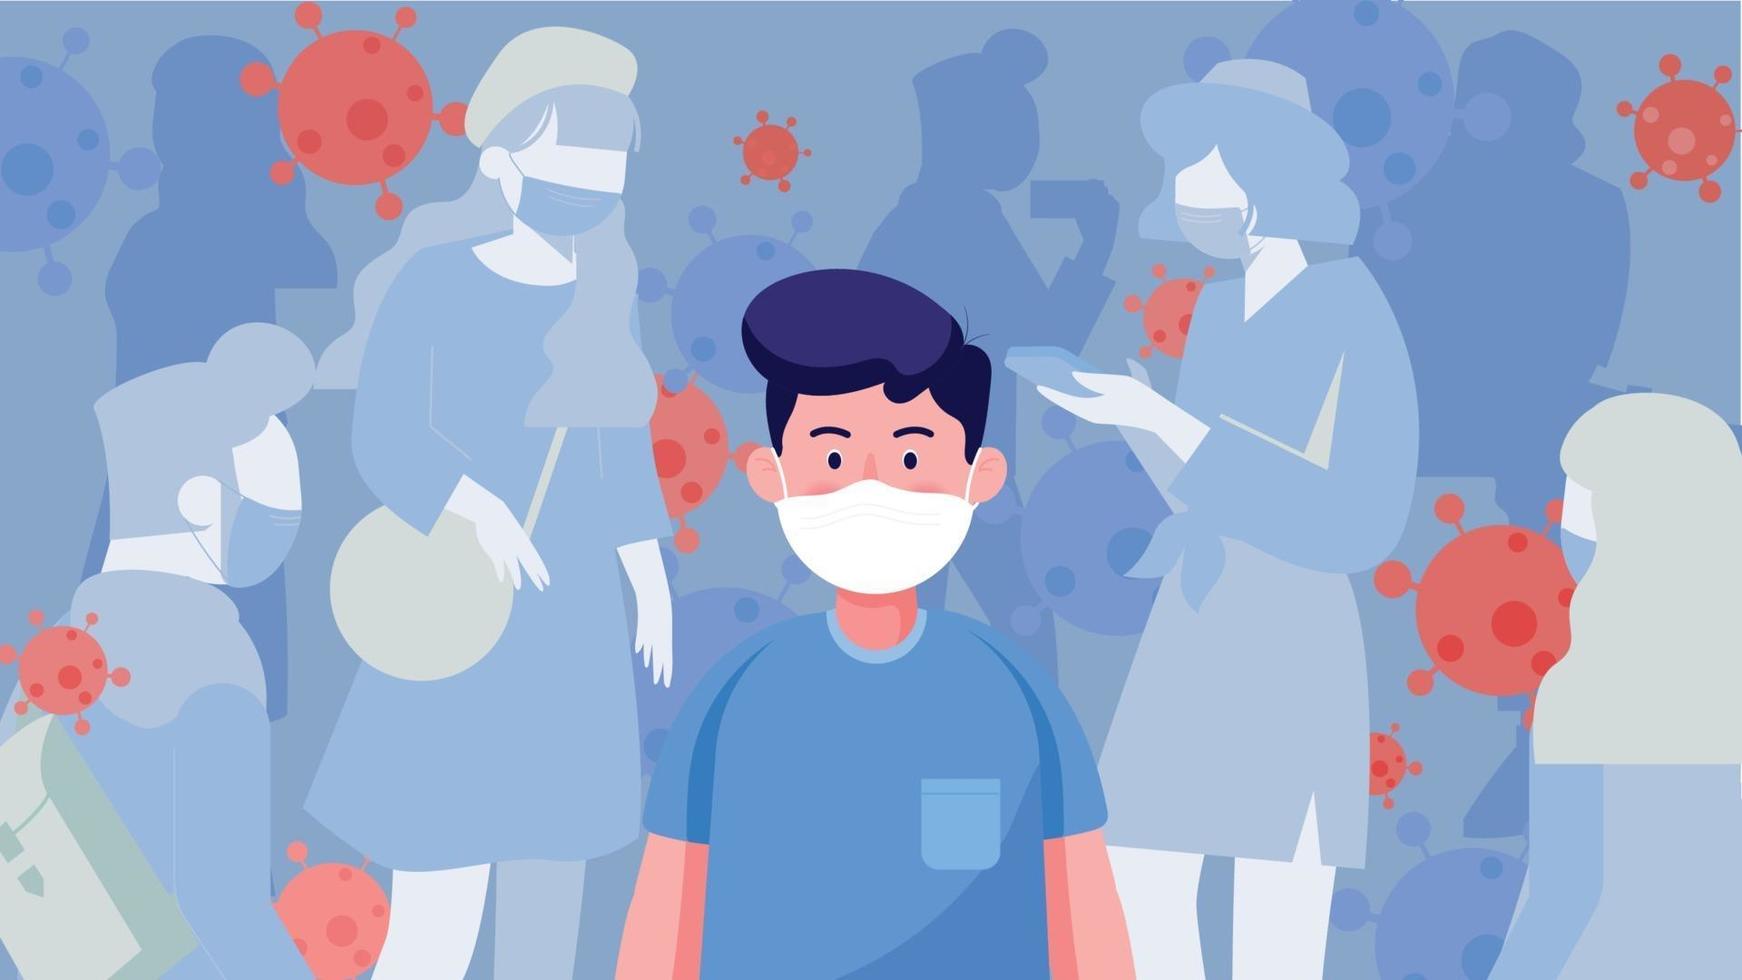 crowd of people wearing protective medical mask. human protection from virus outbreak. world coronavirus and covid-19 outbreaking and pandemic attack concept. vector